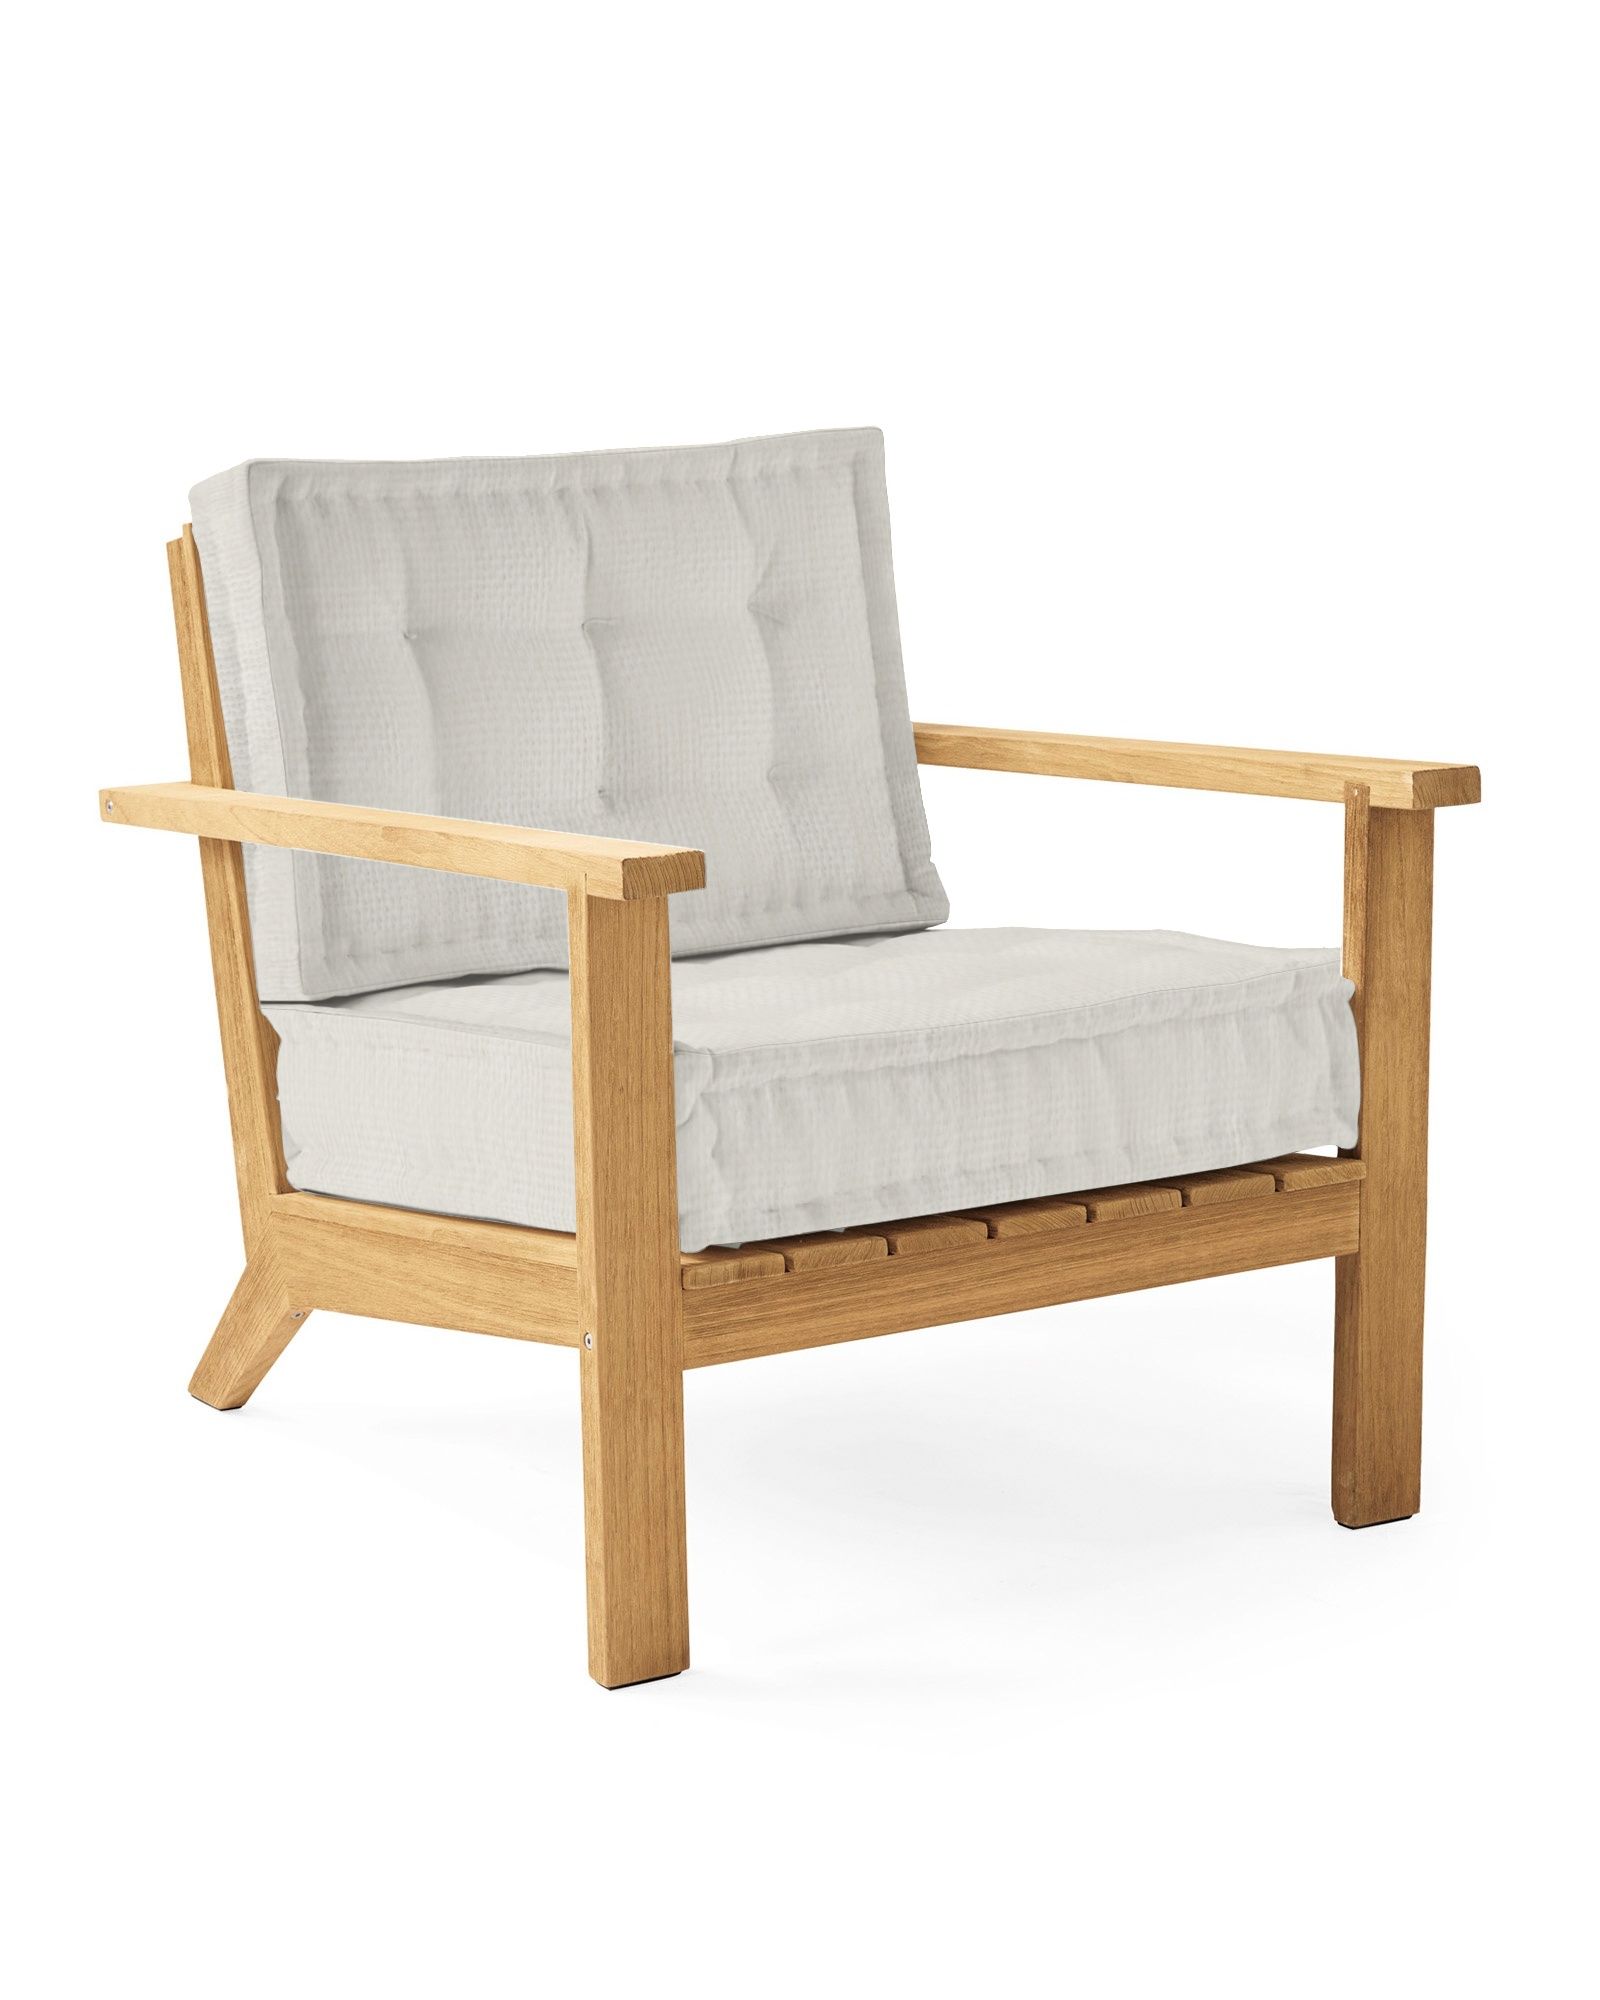 Cliffside Teak Lounge Chair | Serena and Lily